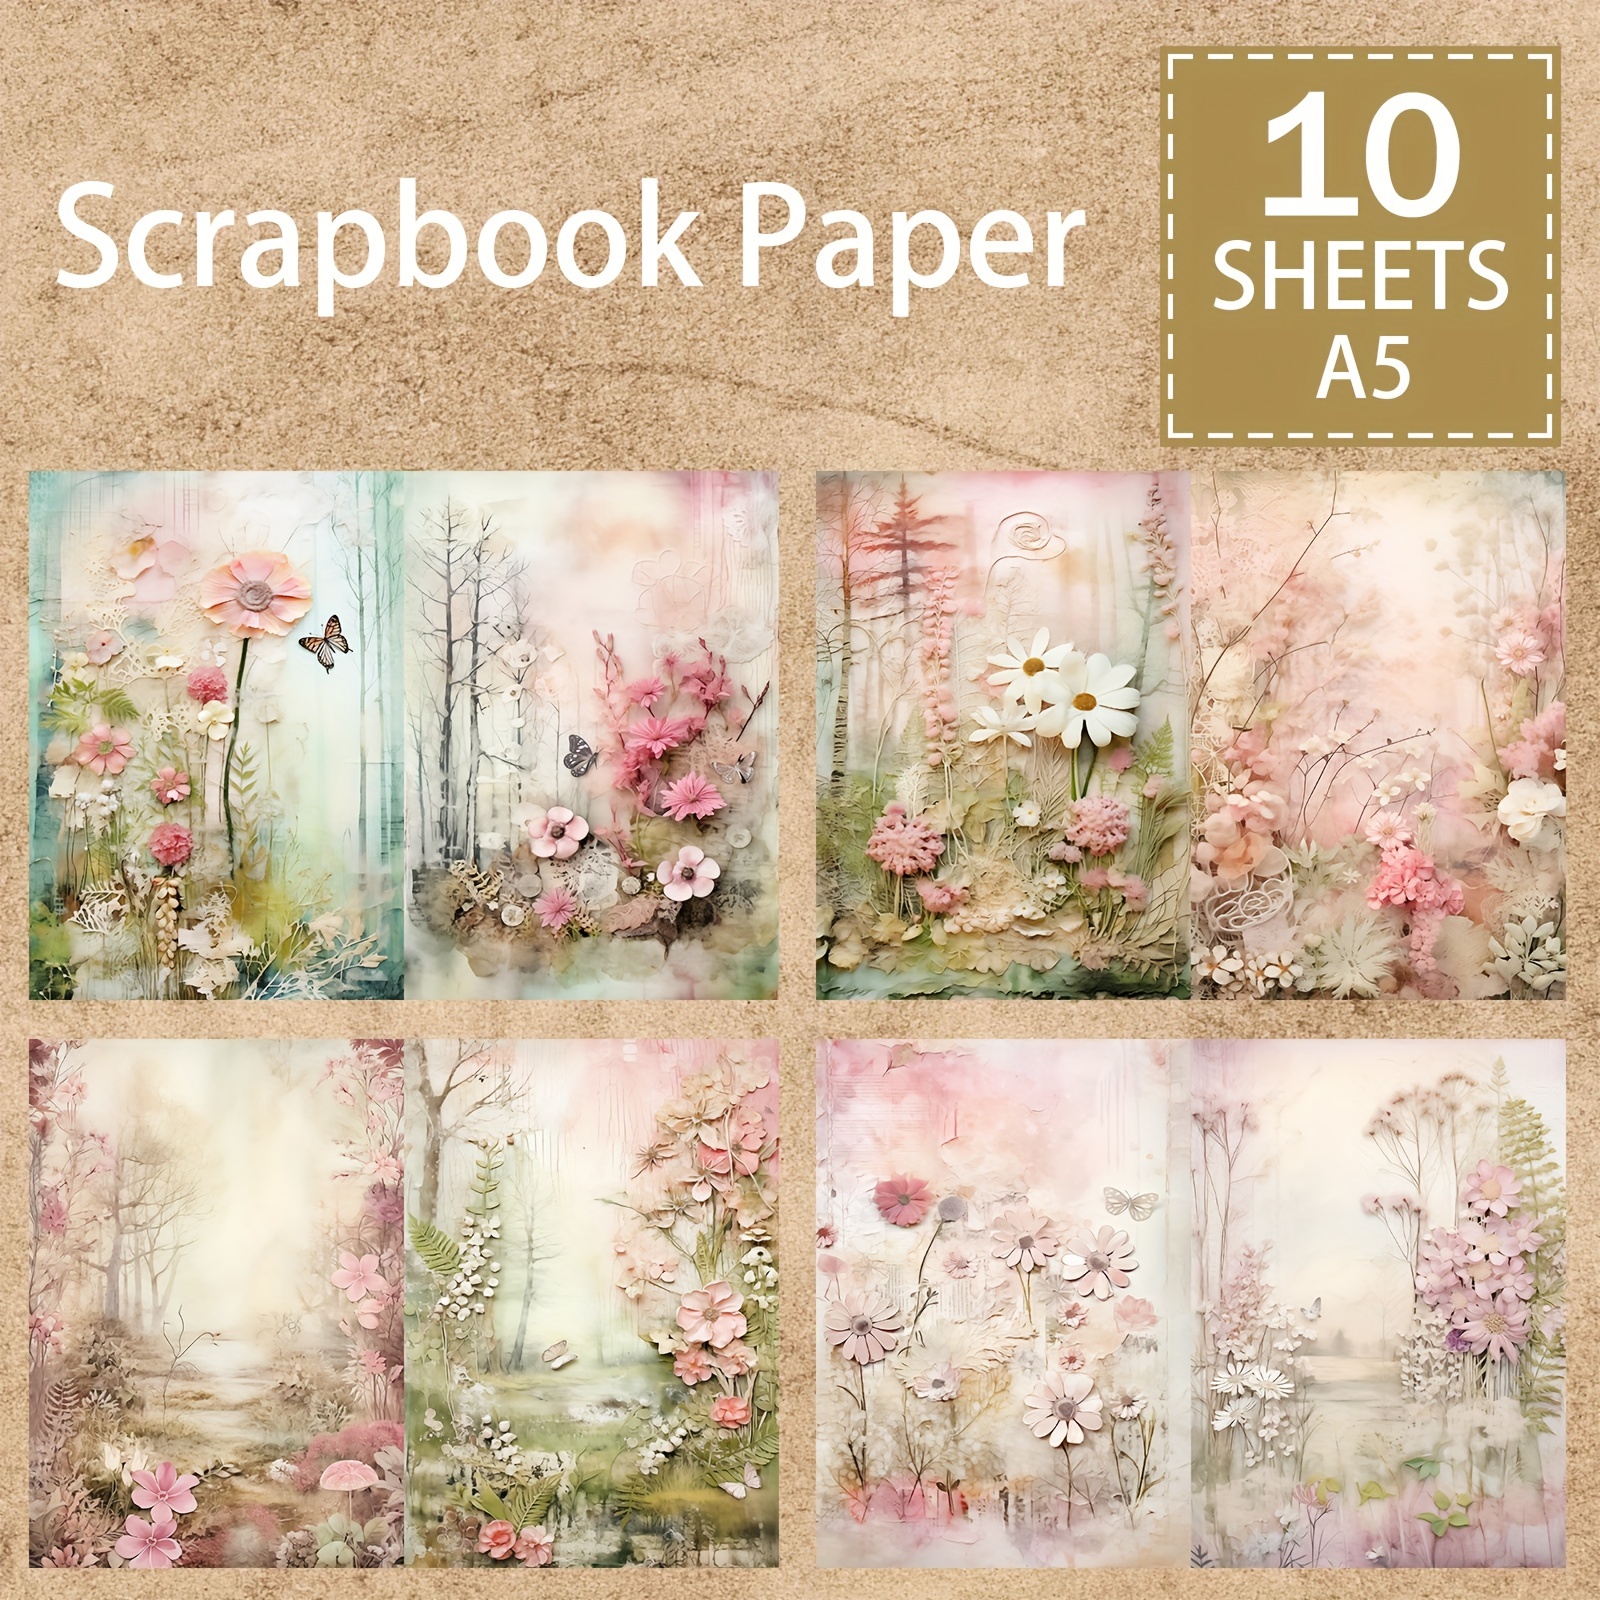 

10 Sheets A5 Vintage Floral And Forest Themed Scrapbook Paper Set, Decorative Background Cardstock For Diy Crafts, Journals, Planners, Greeting Cards - High-quality Bristol Paper Material